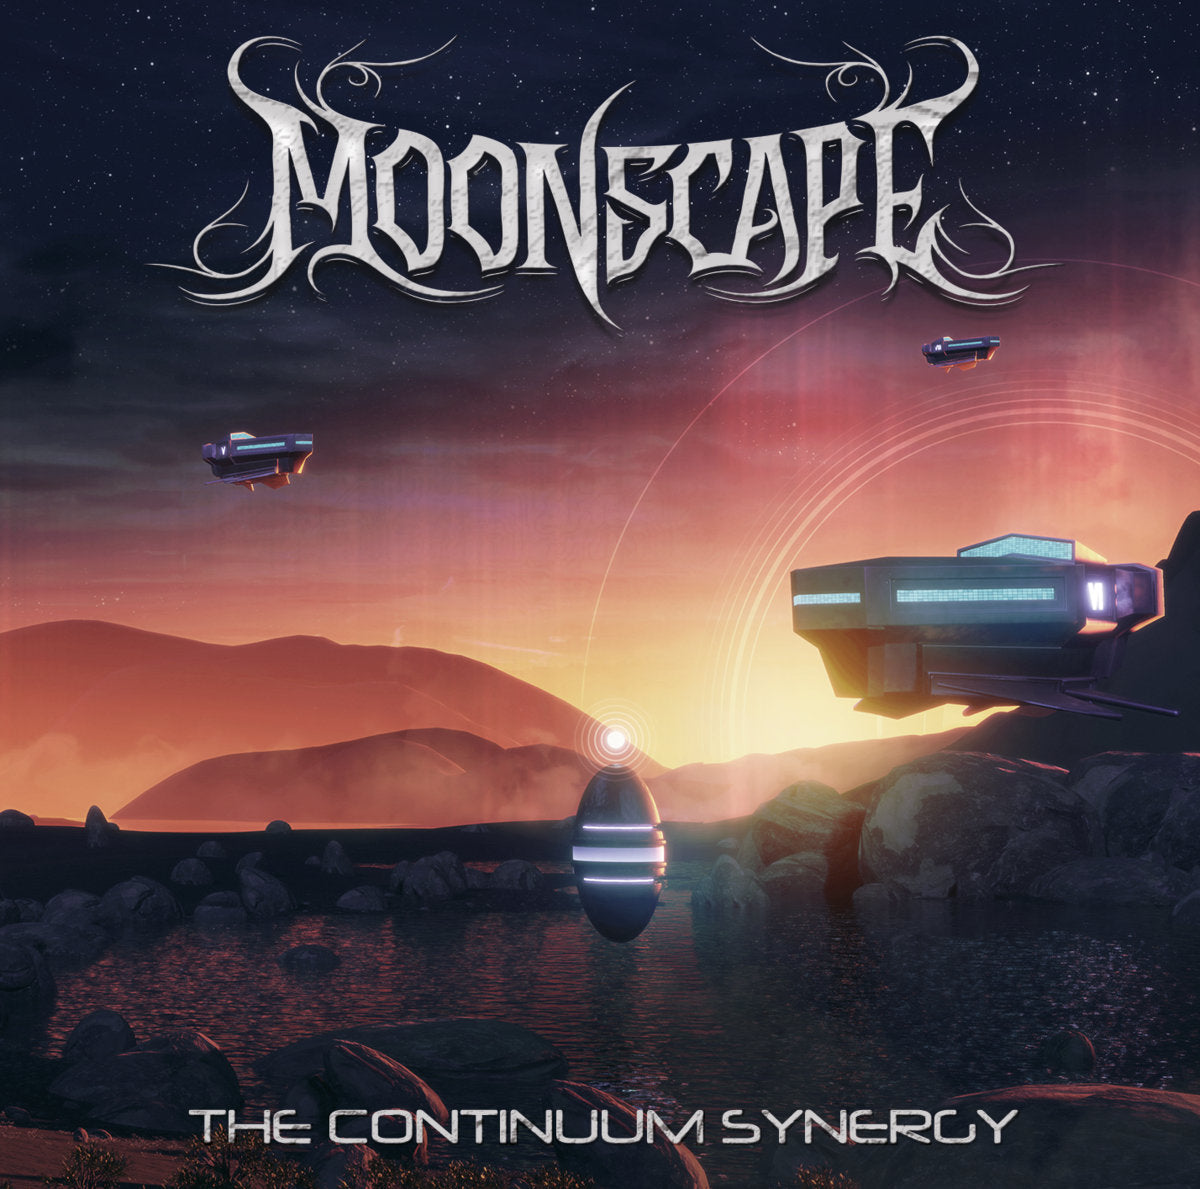 MOONSCAPE - The Continuum Synergy CD